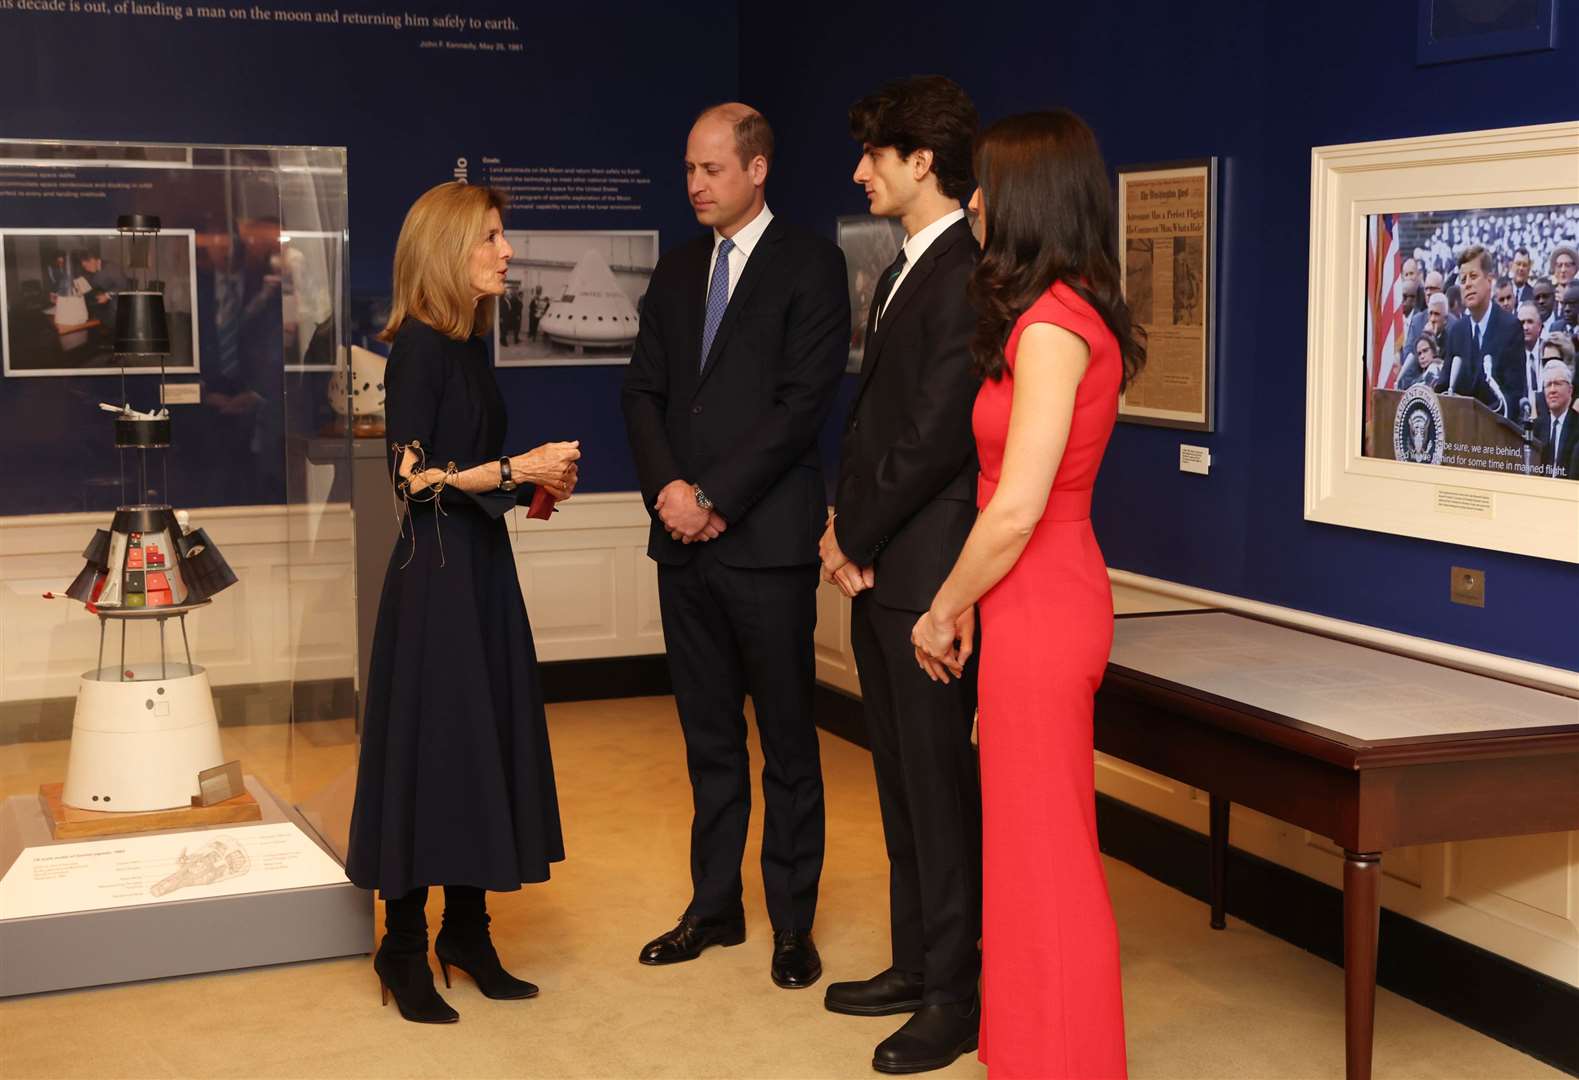 William with Ambassador Caroline Kennedy (left), the daughter of John F. Kennedy, during a visit to the John F. Kennedy Presidential Library and Museum at Columbia Point in Boston (Ian Vogler/Daily Mirror/PA)